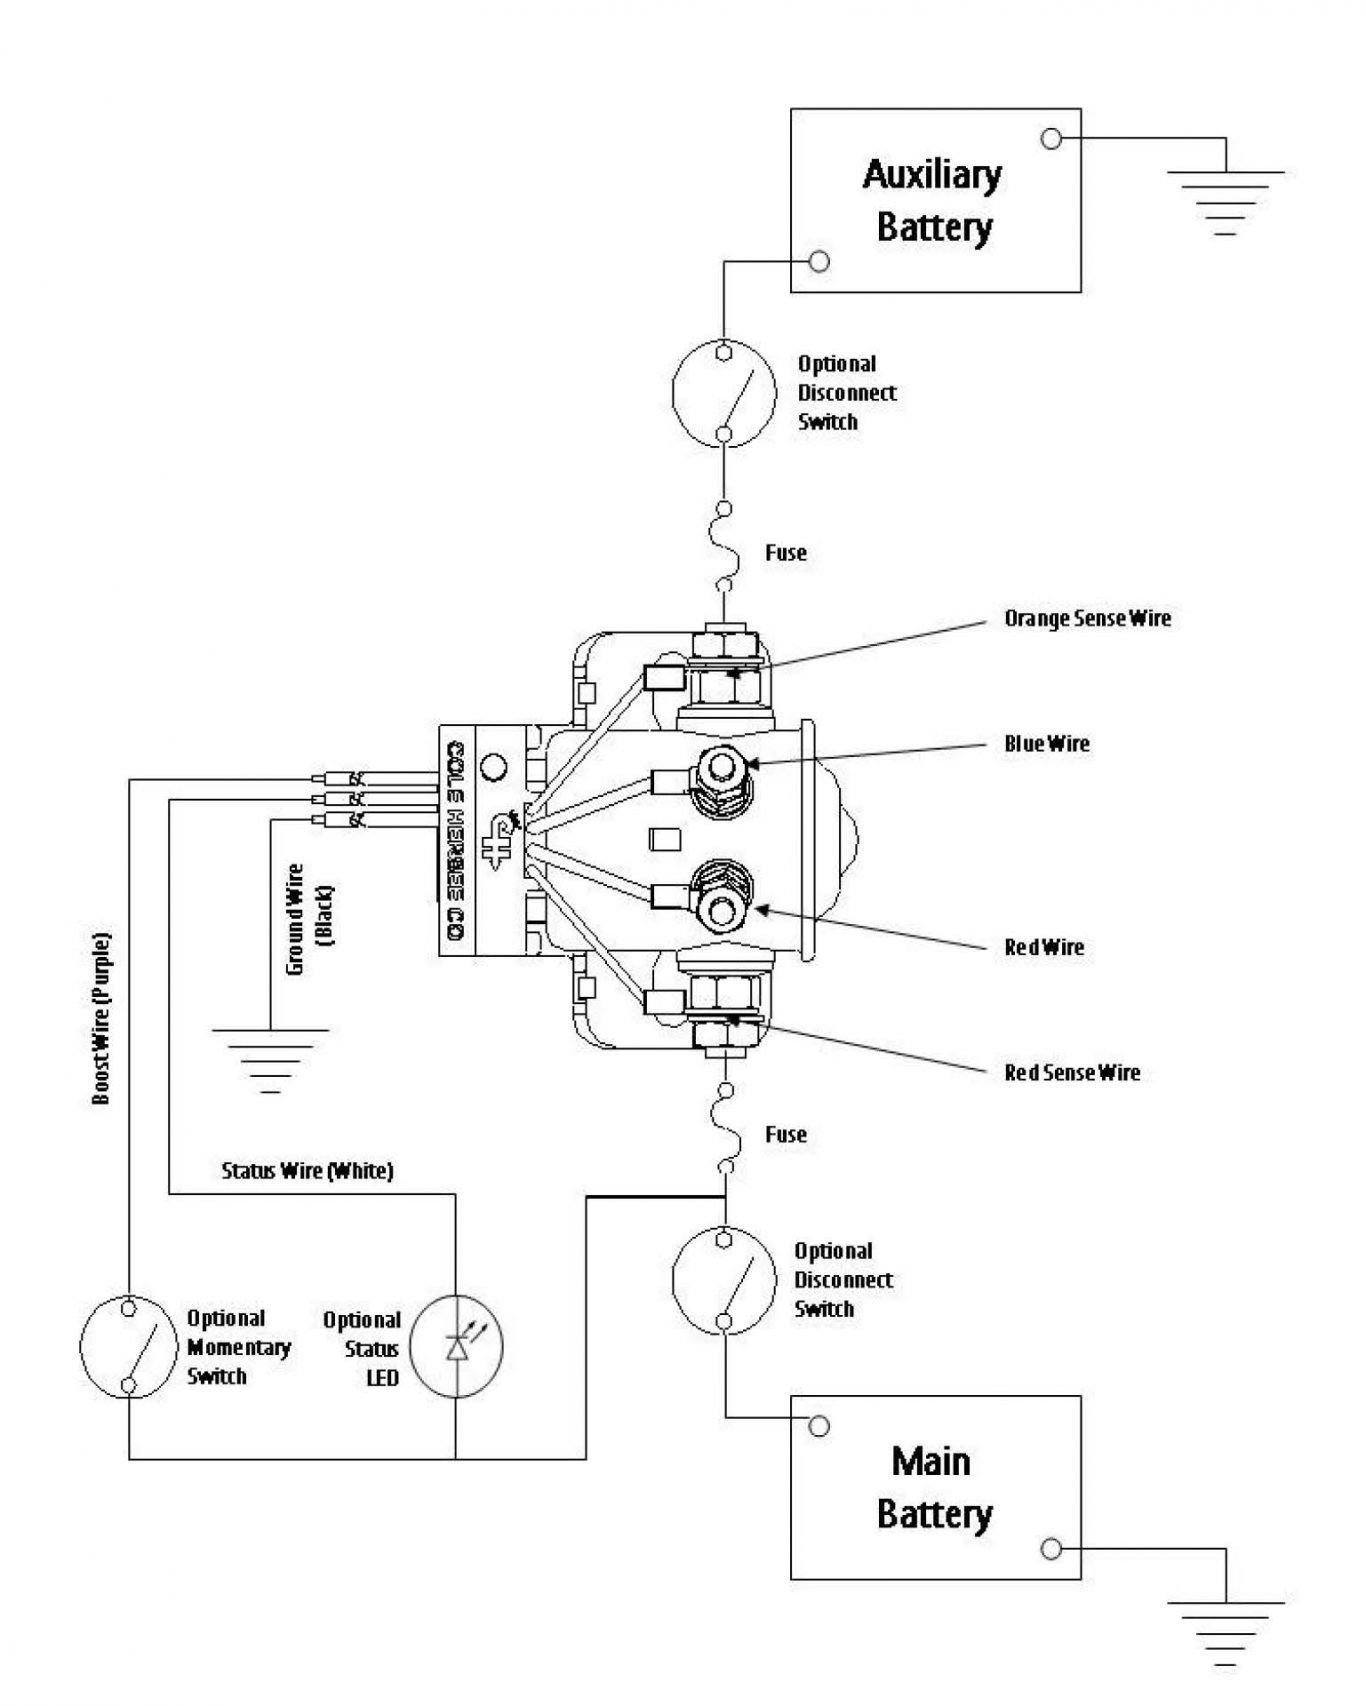 Double Pole toggle Switch Wiring Diagram Double Pole toggle Switch Wiring Diagram Electrical Circuit Wiring Of Double Pole toggle Switch Wiring Diagram